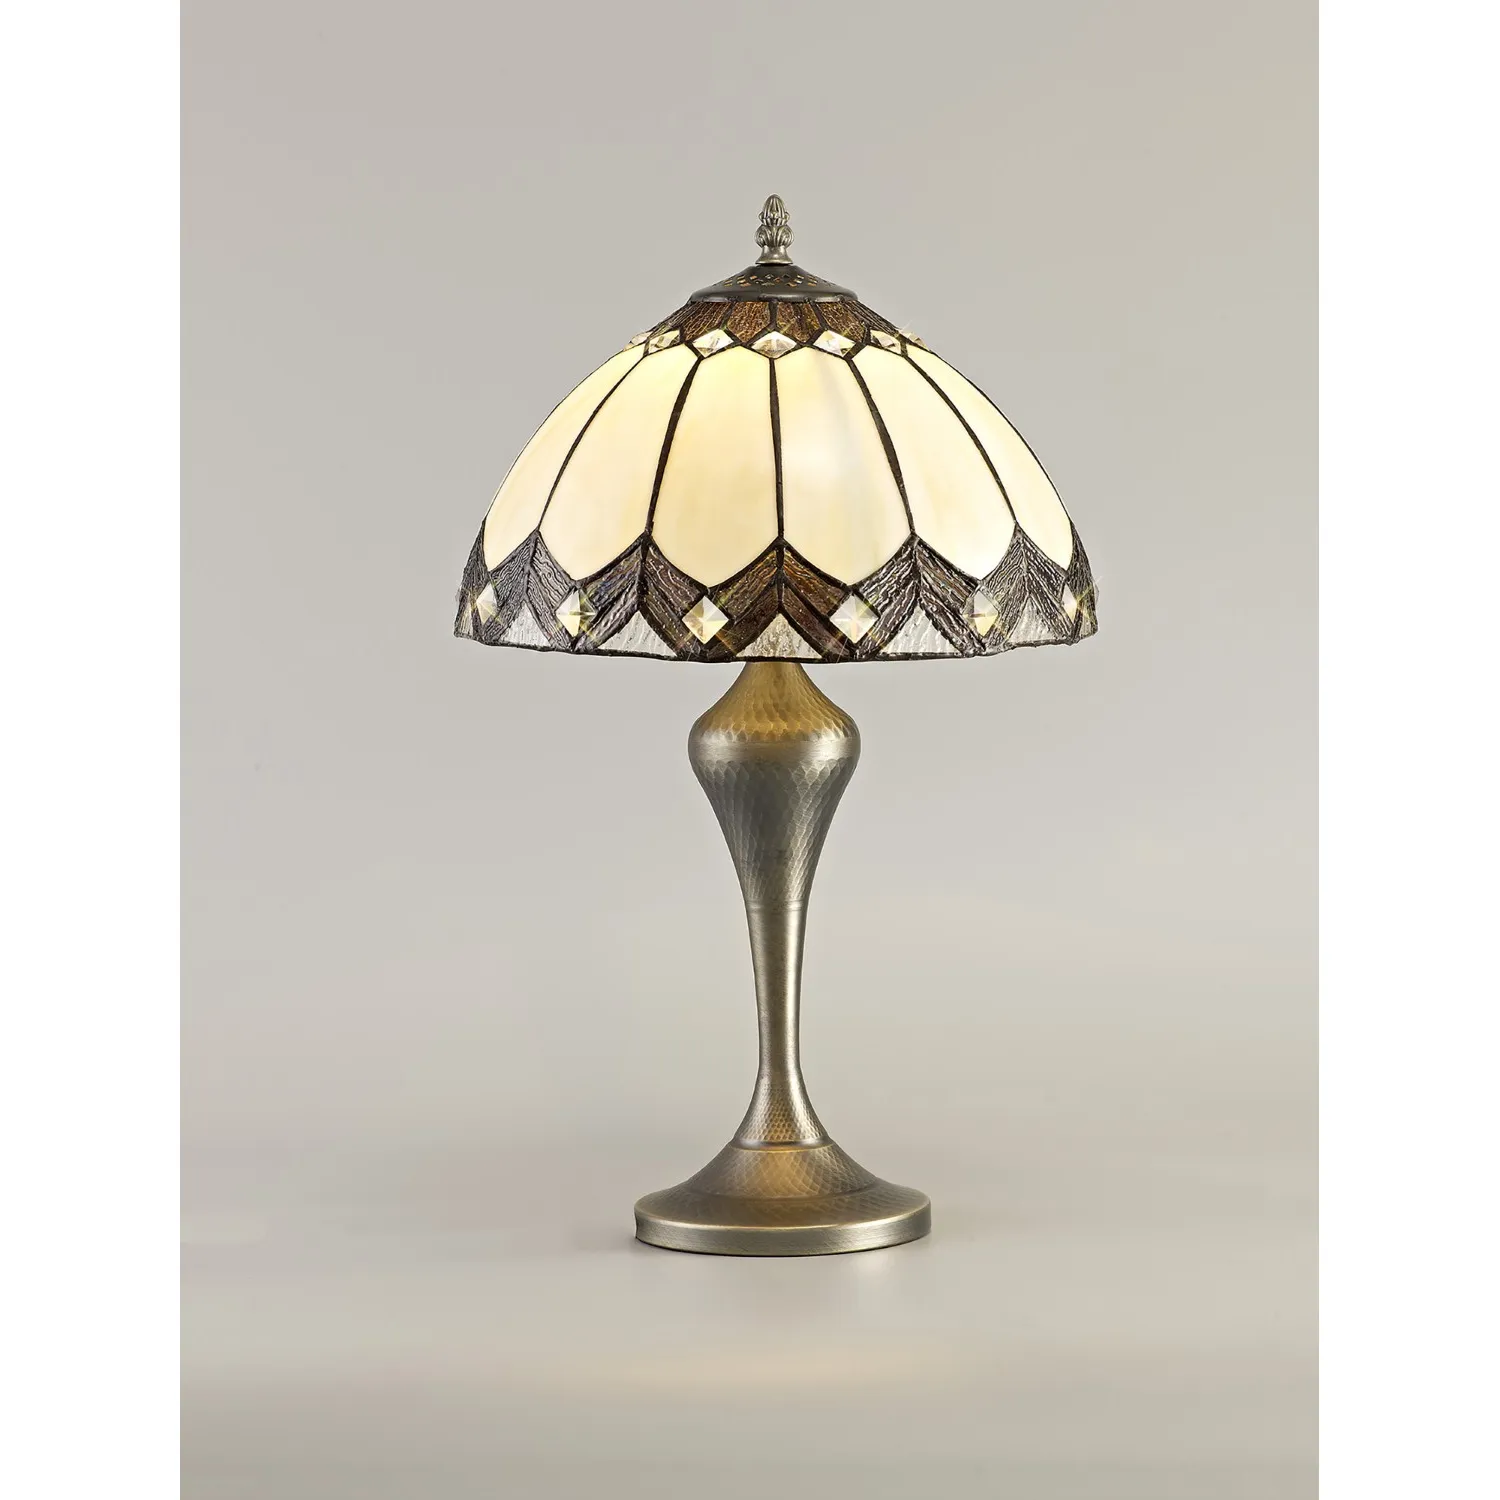 Merton Tiffany Table Lamp, 1 x E27, Aged Antique Brass Base Cream Brown Glass Clear Crystal